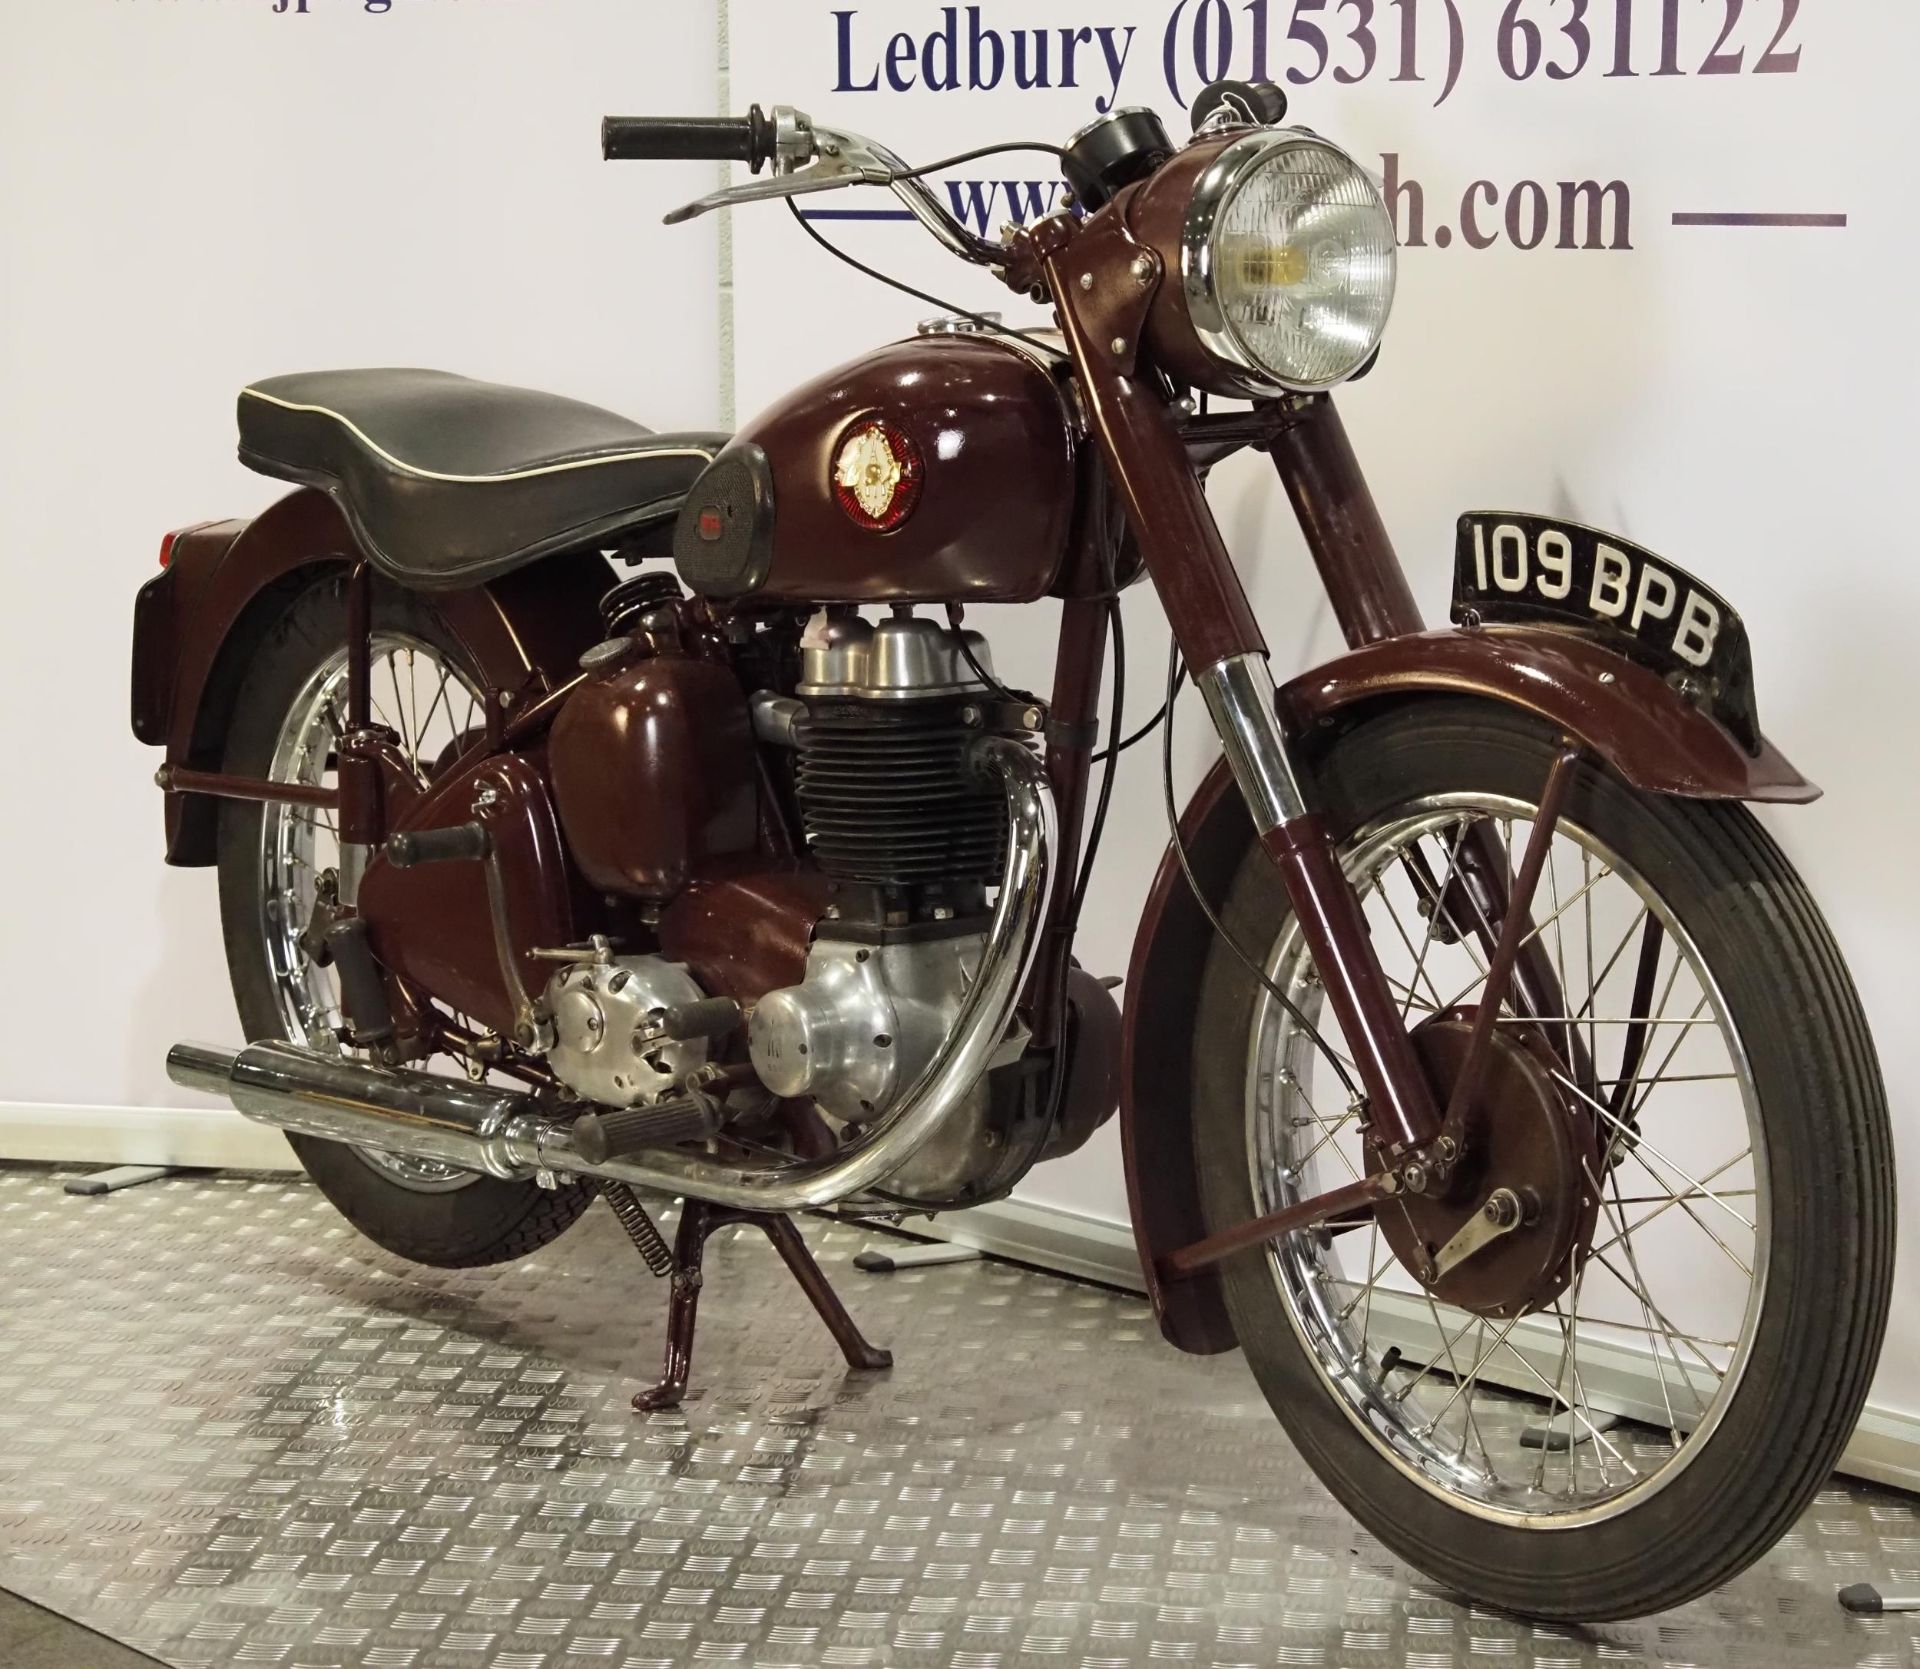 BSA C11G motorcycle. 1956. 250cc. Frame No. BC115416998 Engine No. BC11G22568 Engine turns over with - Image 2 of 6